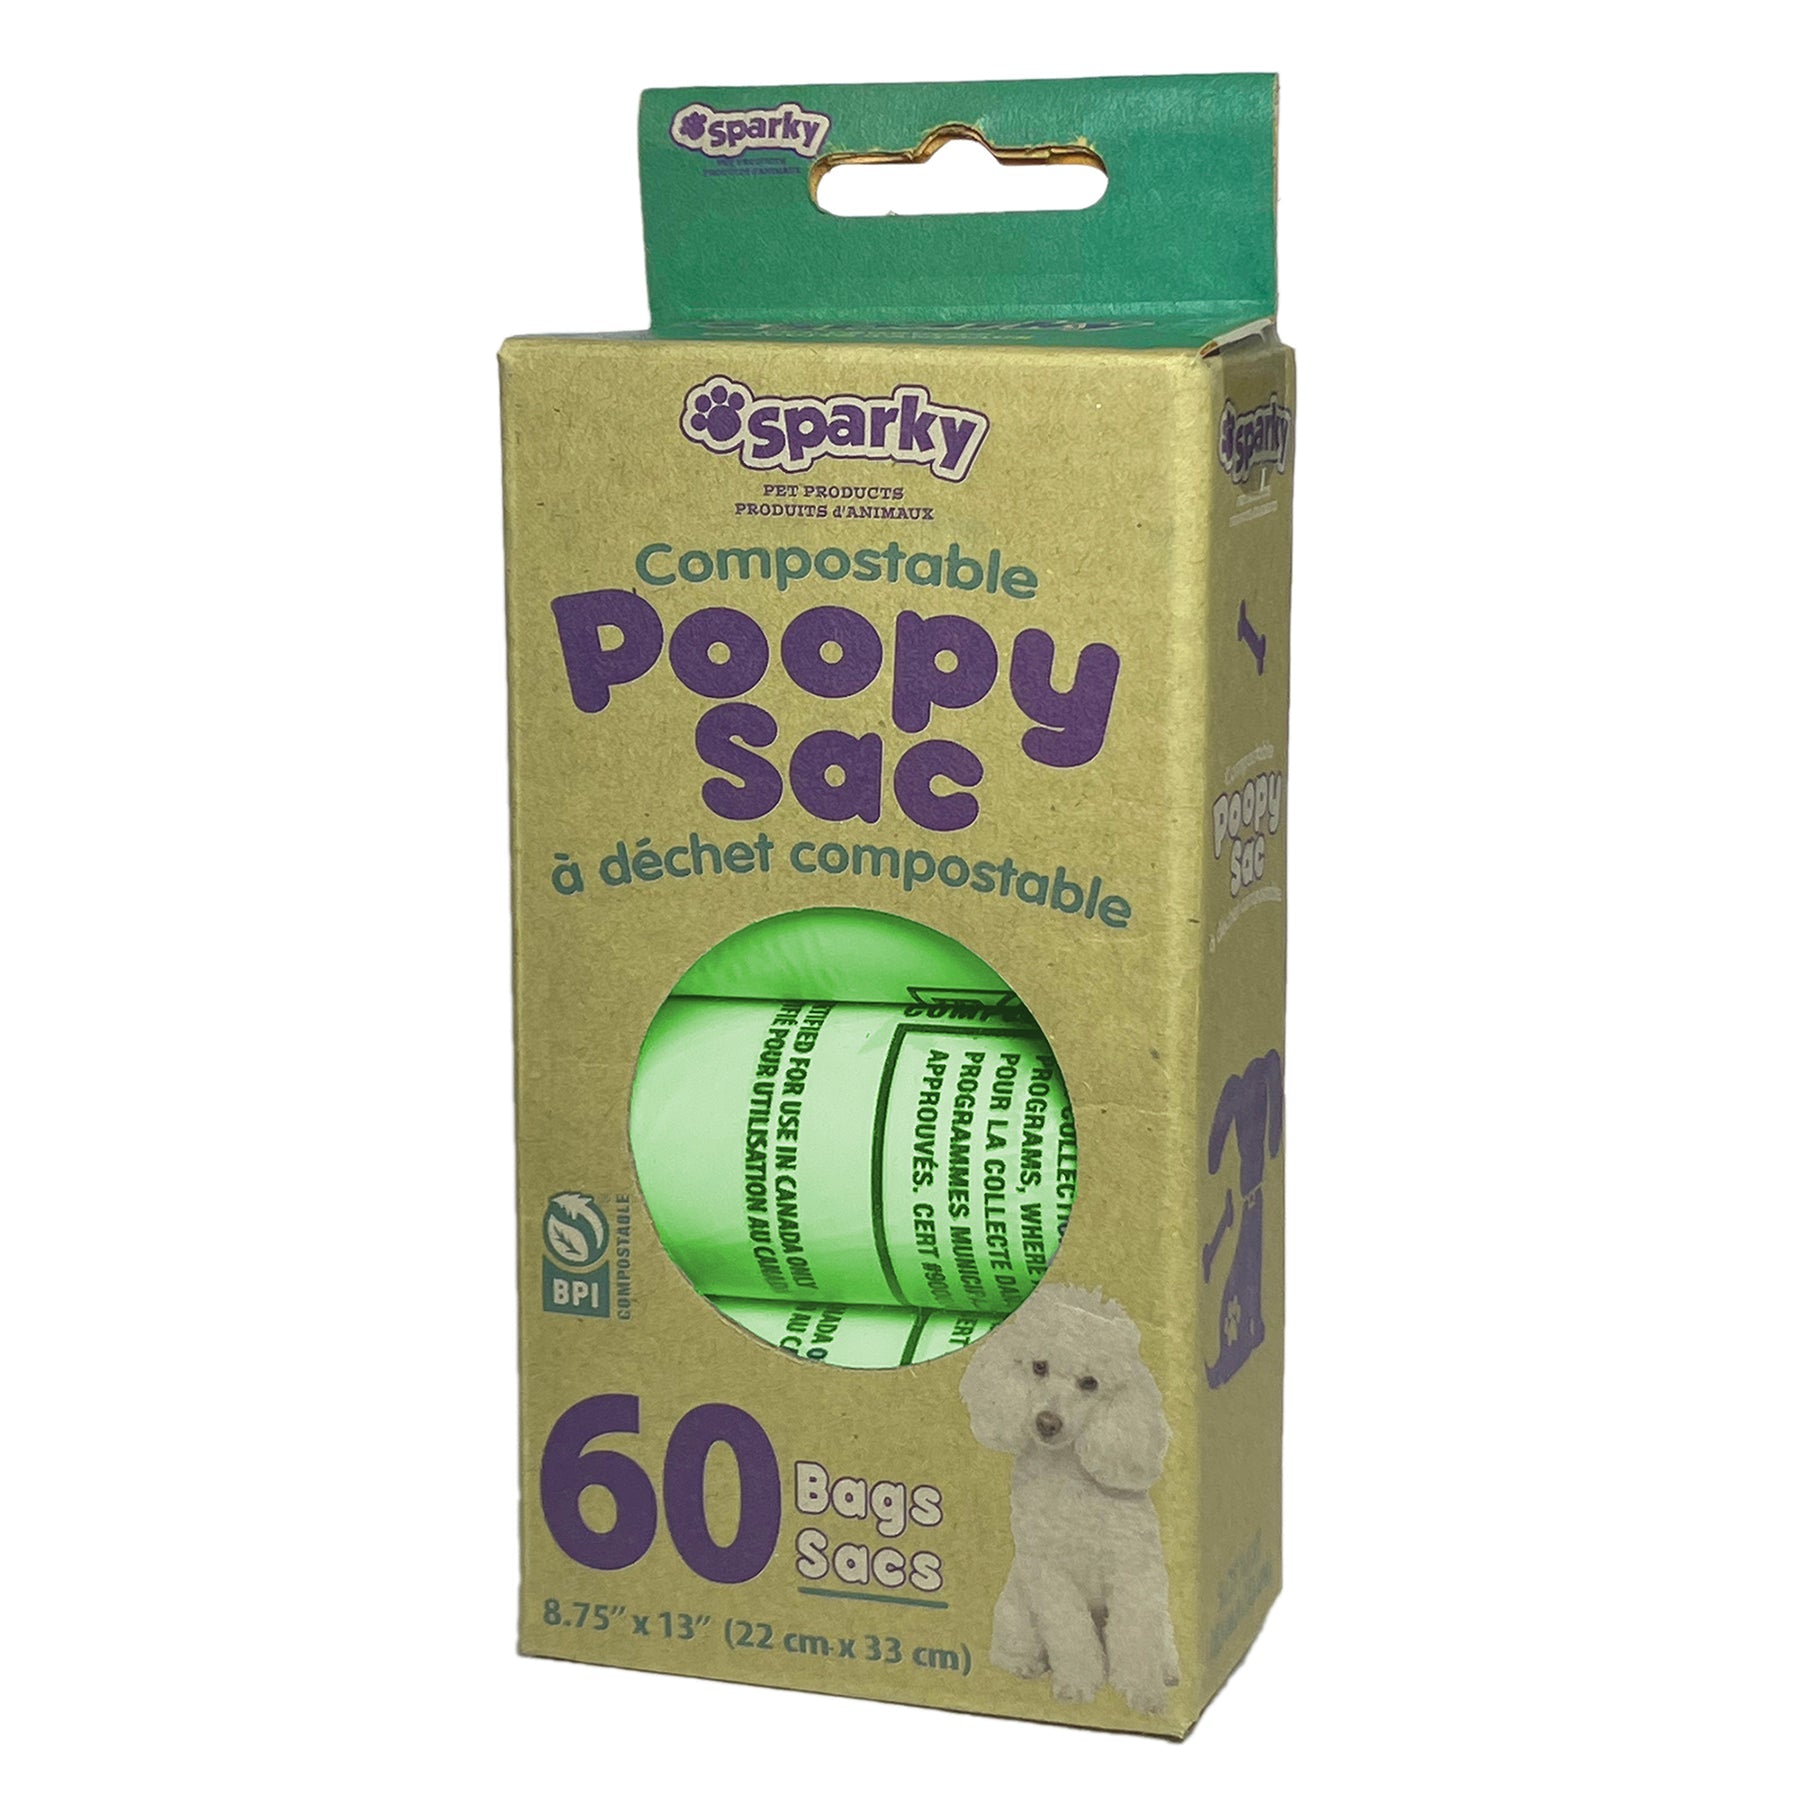 Sparky 60 Poopy Bags Compostable 8.75x13in